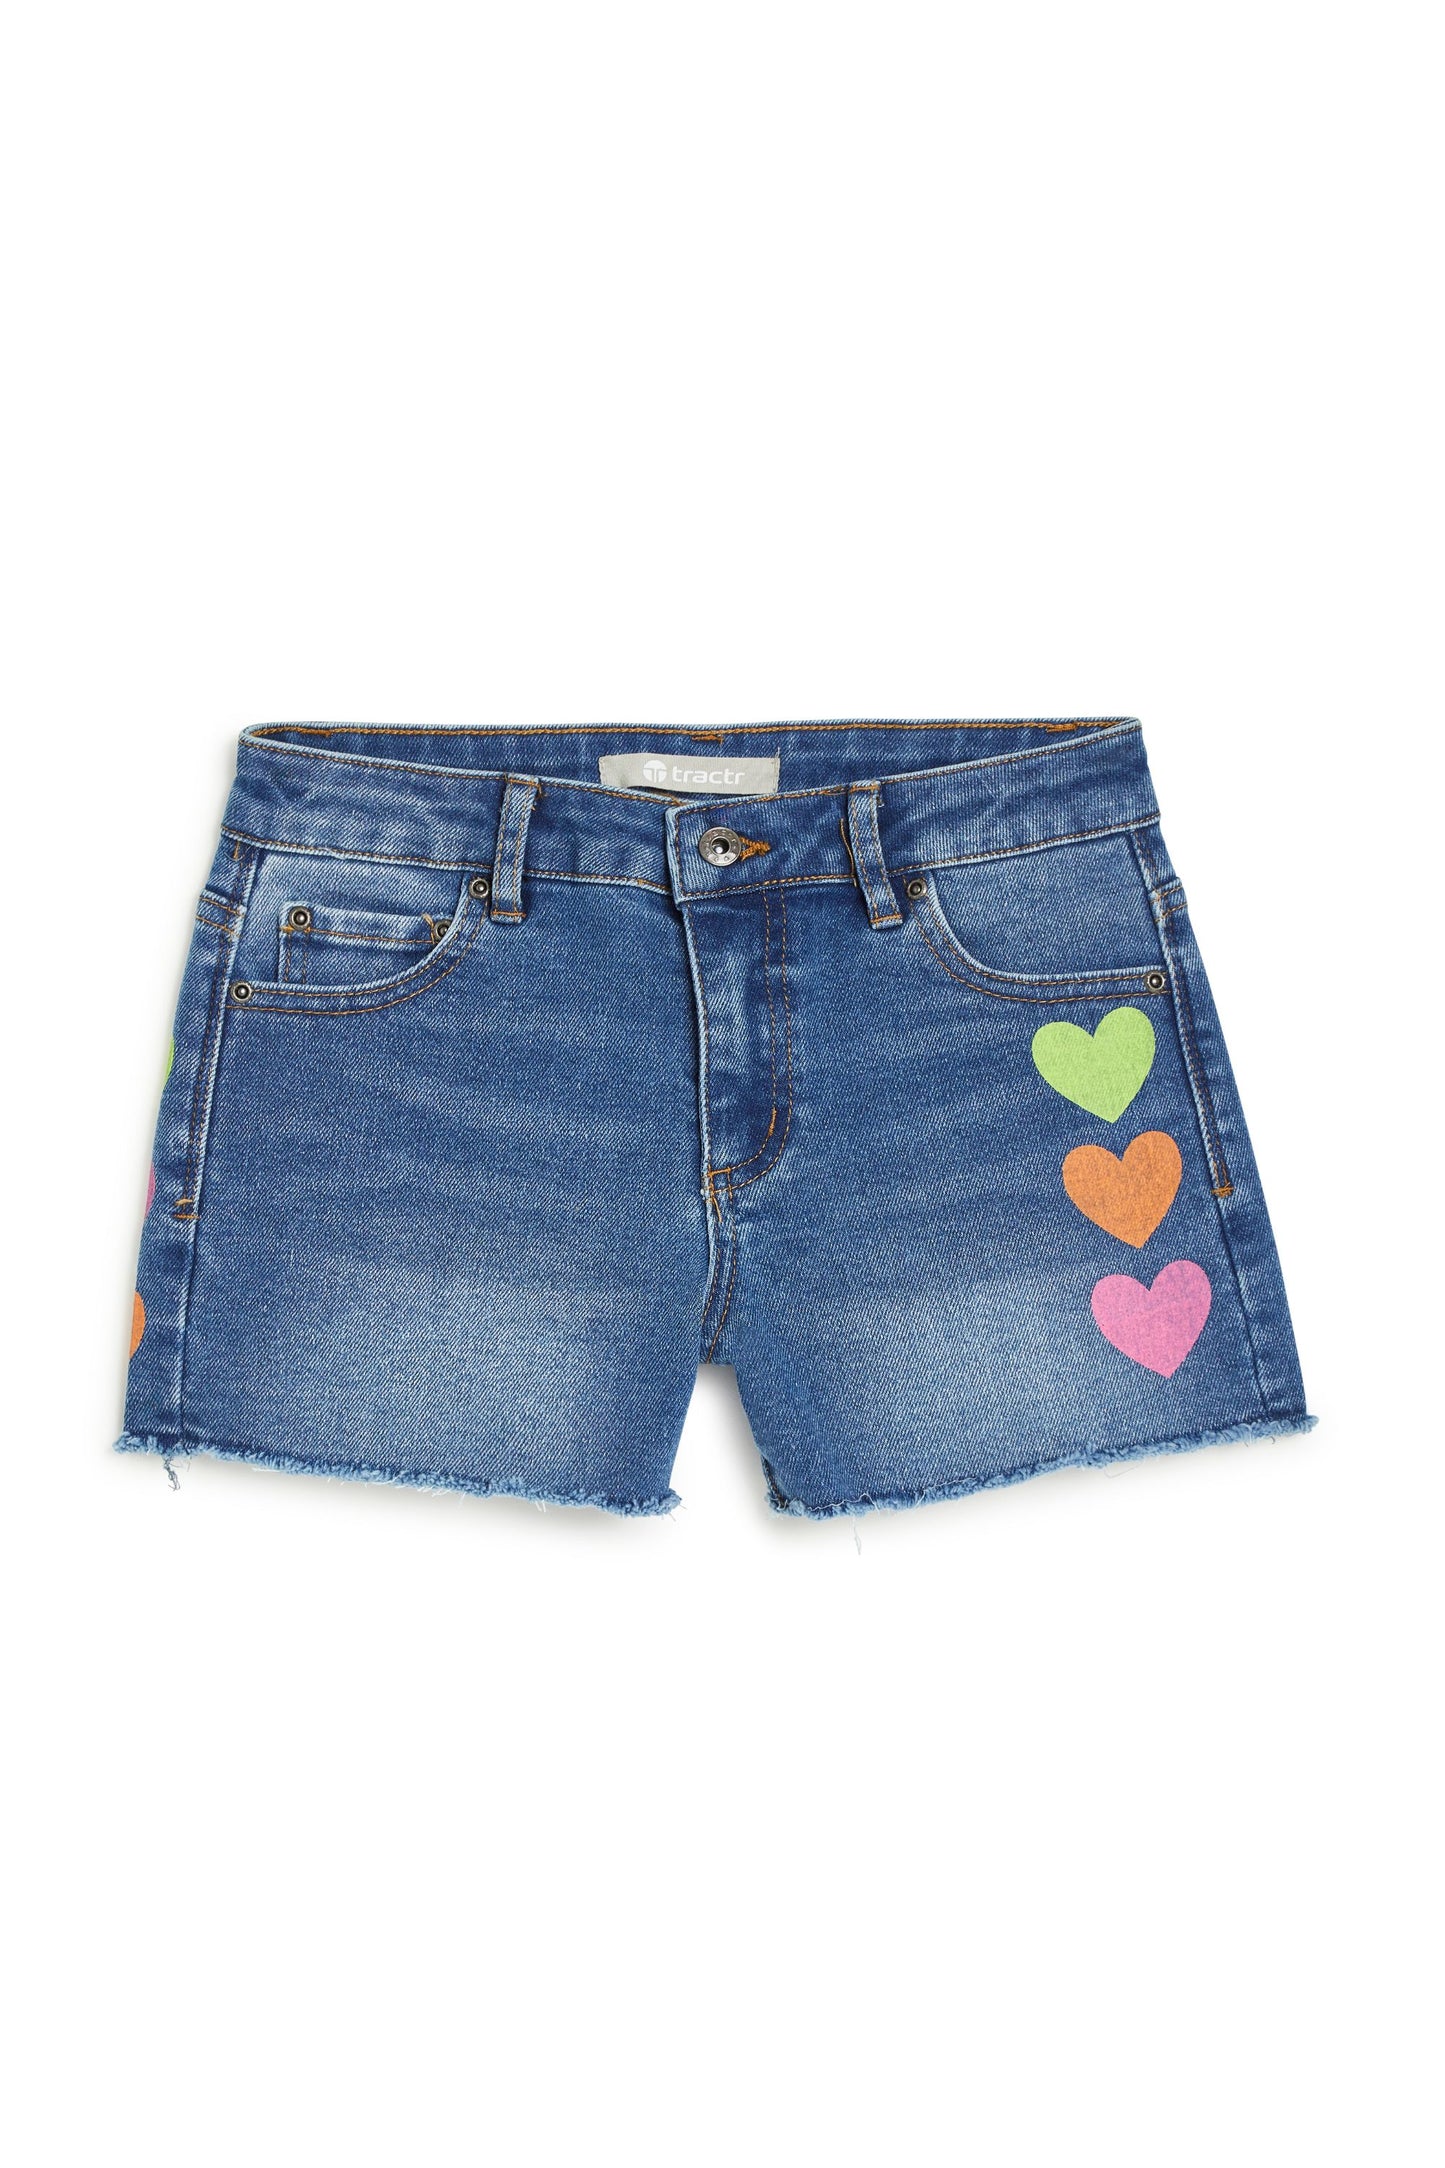 Brittany - Colorful Heart Print Short